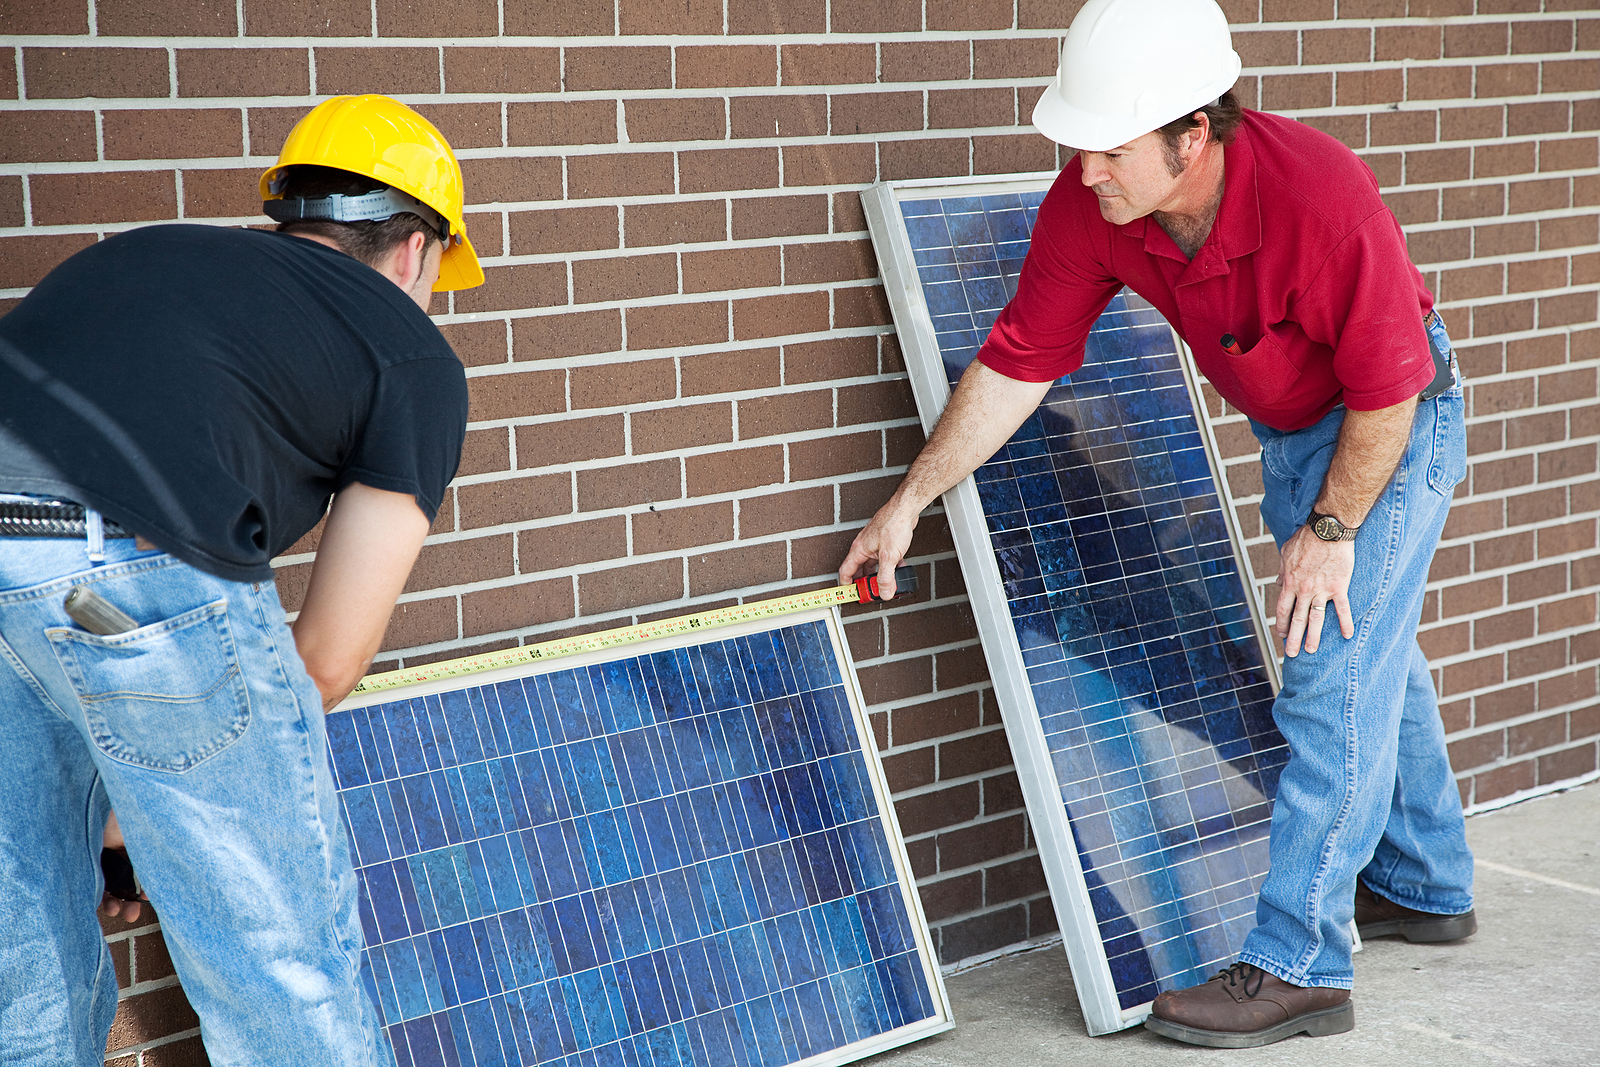 Electricians using solar panels for electricity